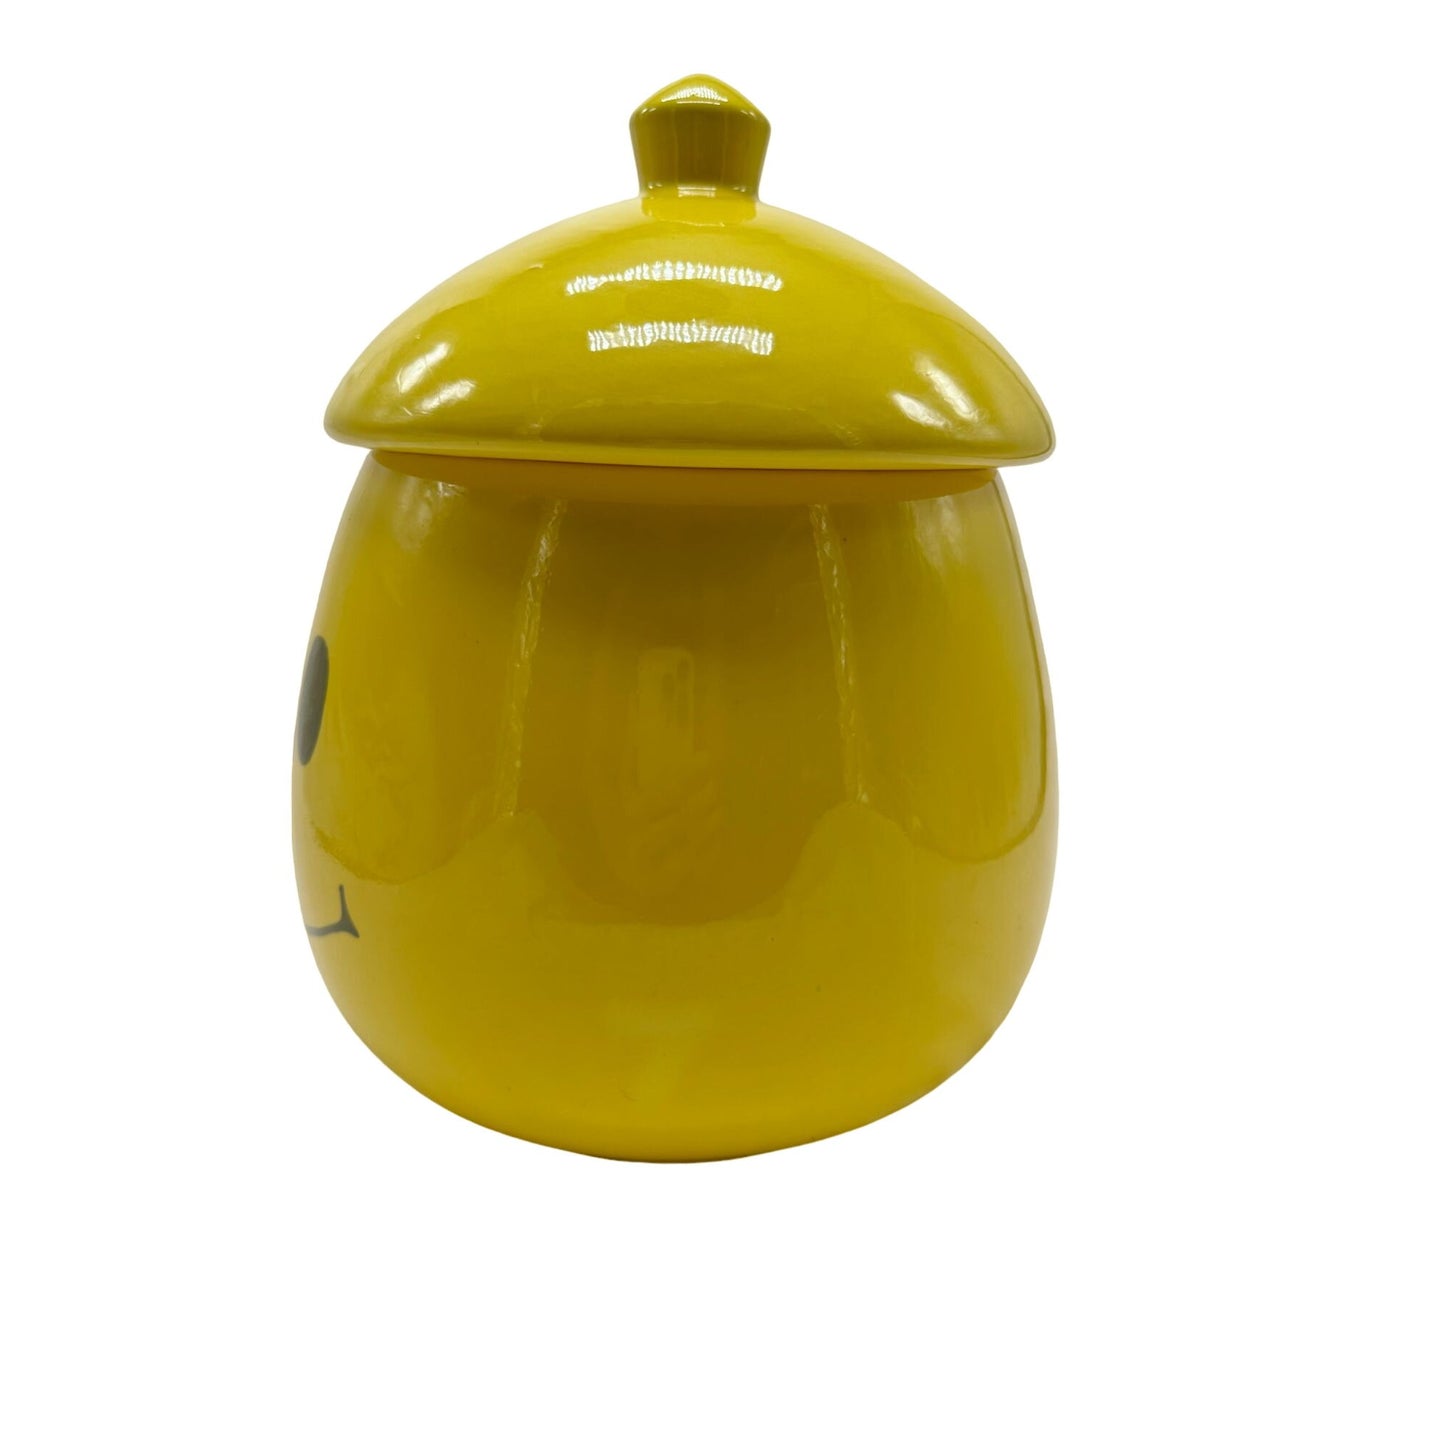 Vintage Collectible 1970's Smiley Face Cookie Jar Yellow Retro 11"Tall 9"Wide